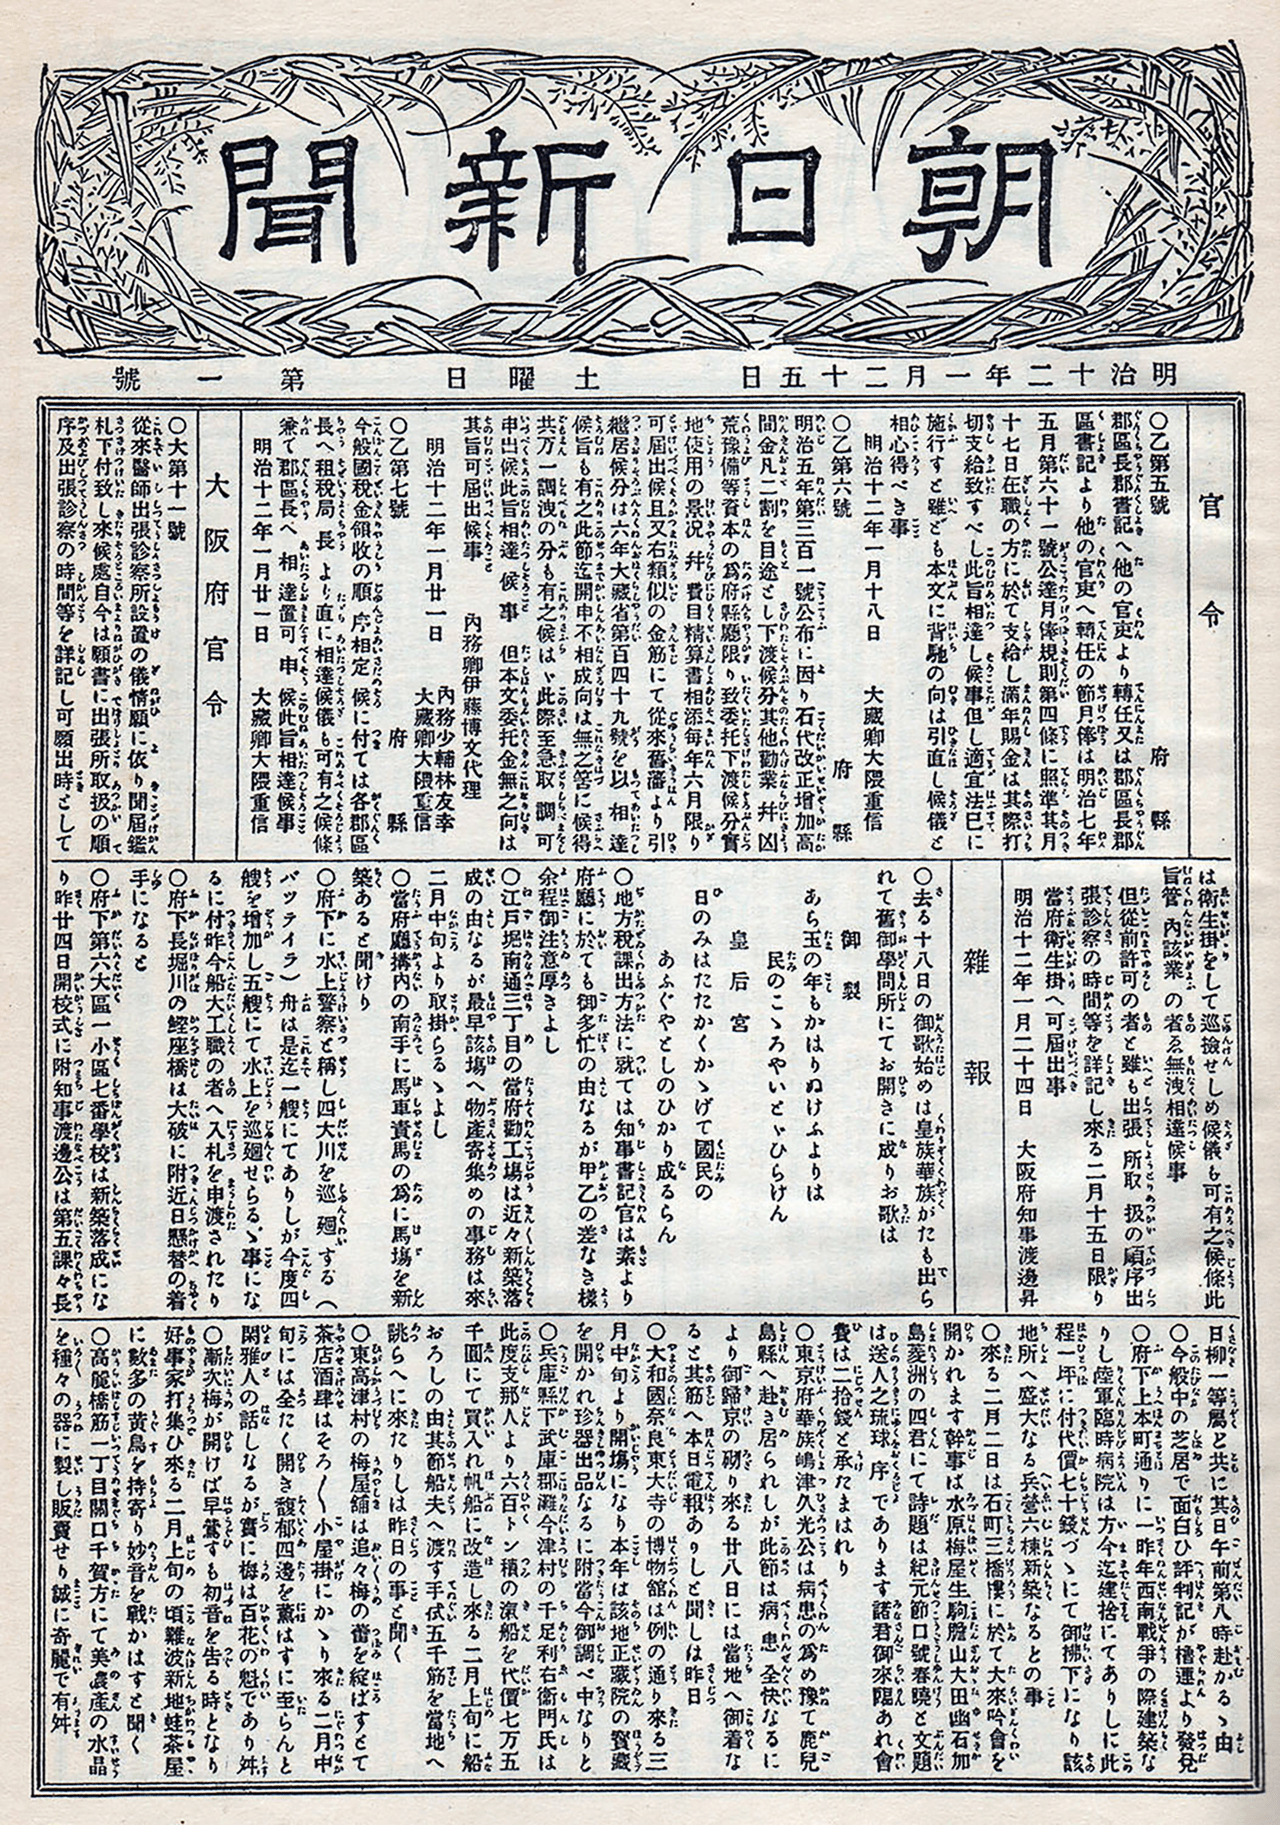 Asahi Shimbun, First Issue of the newspaper, Front Page, January 25, 1879. 